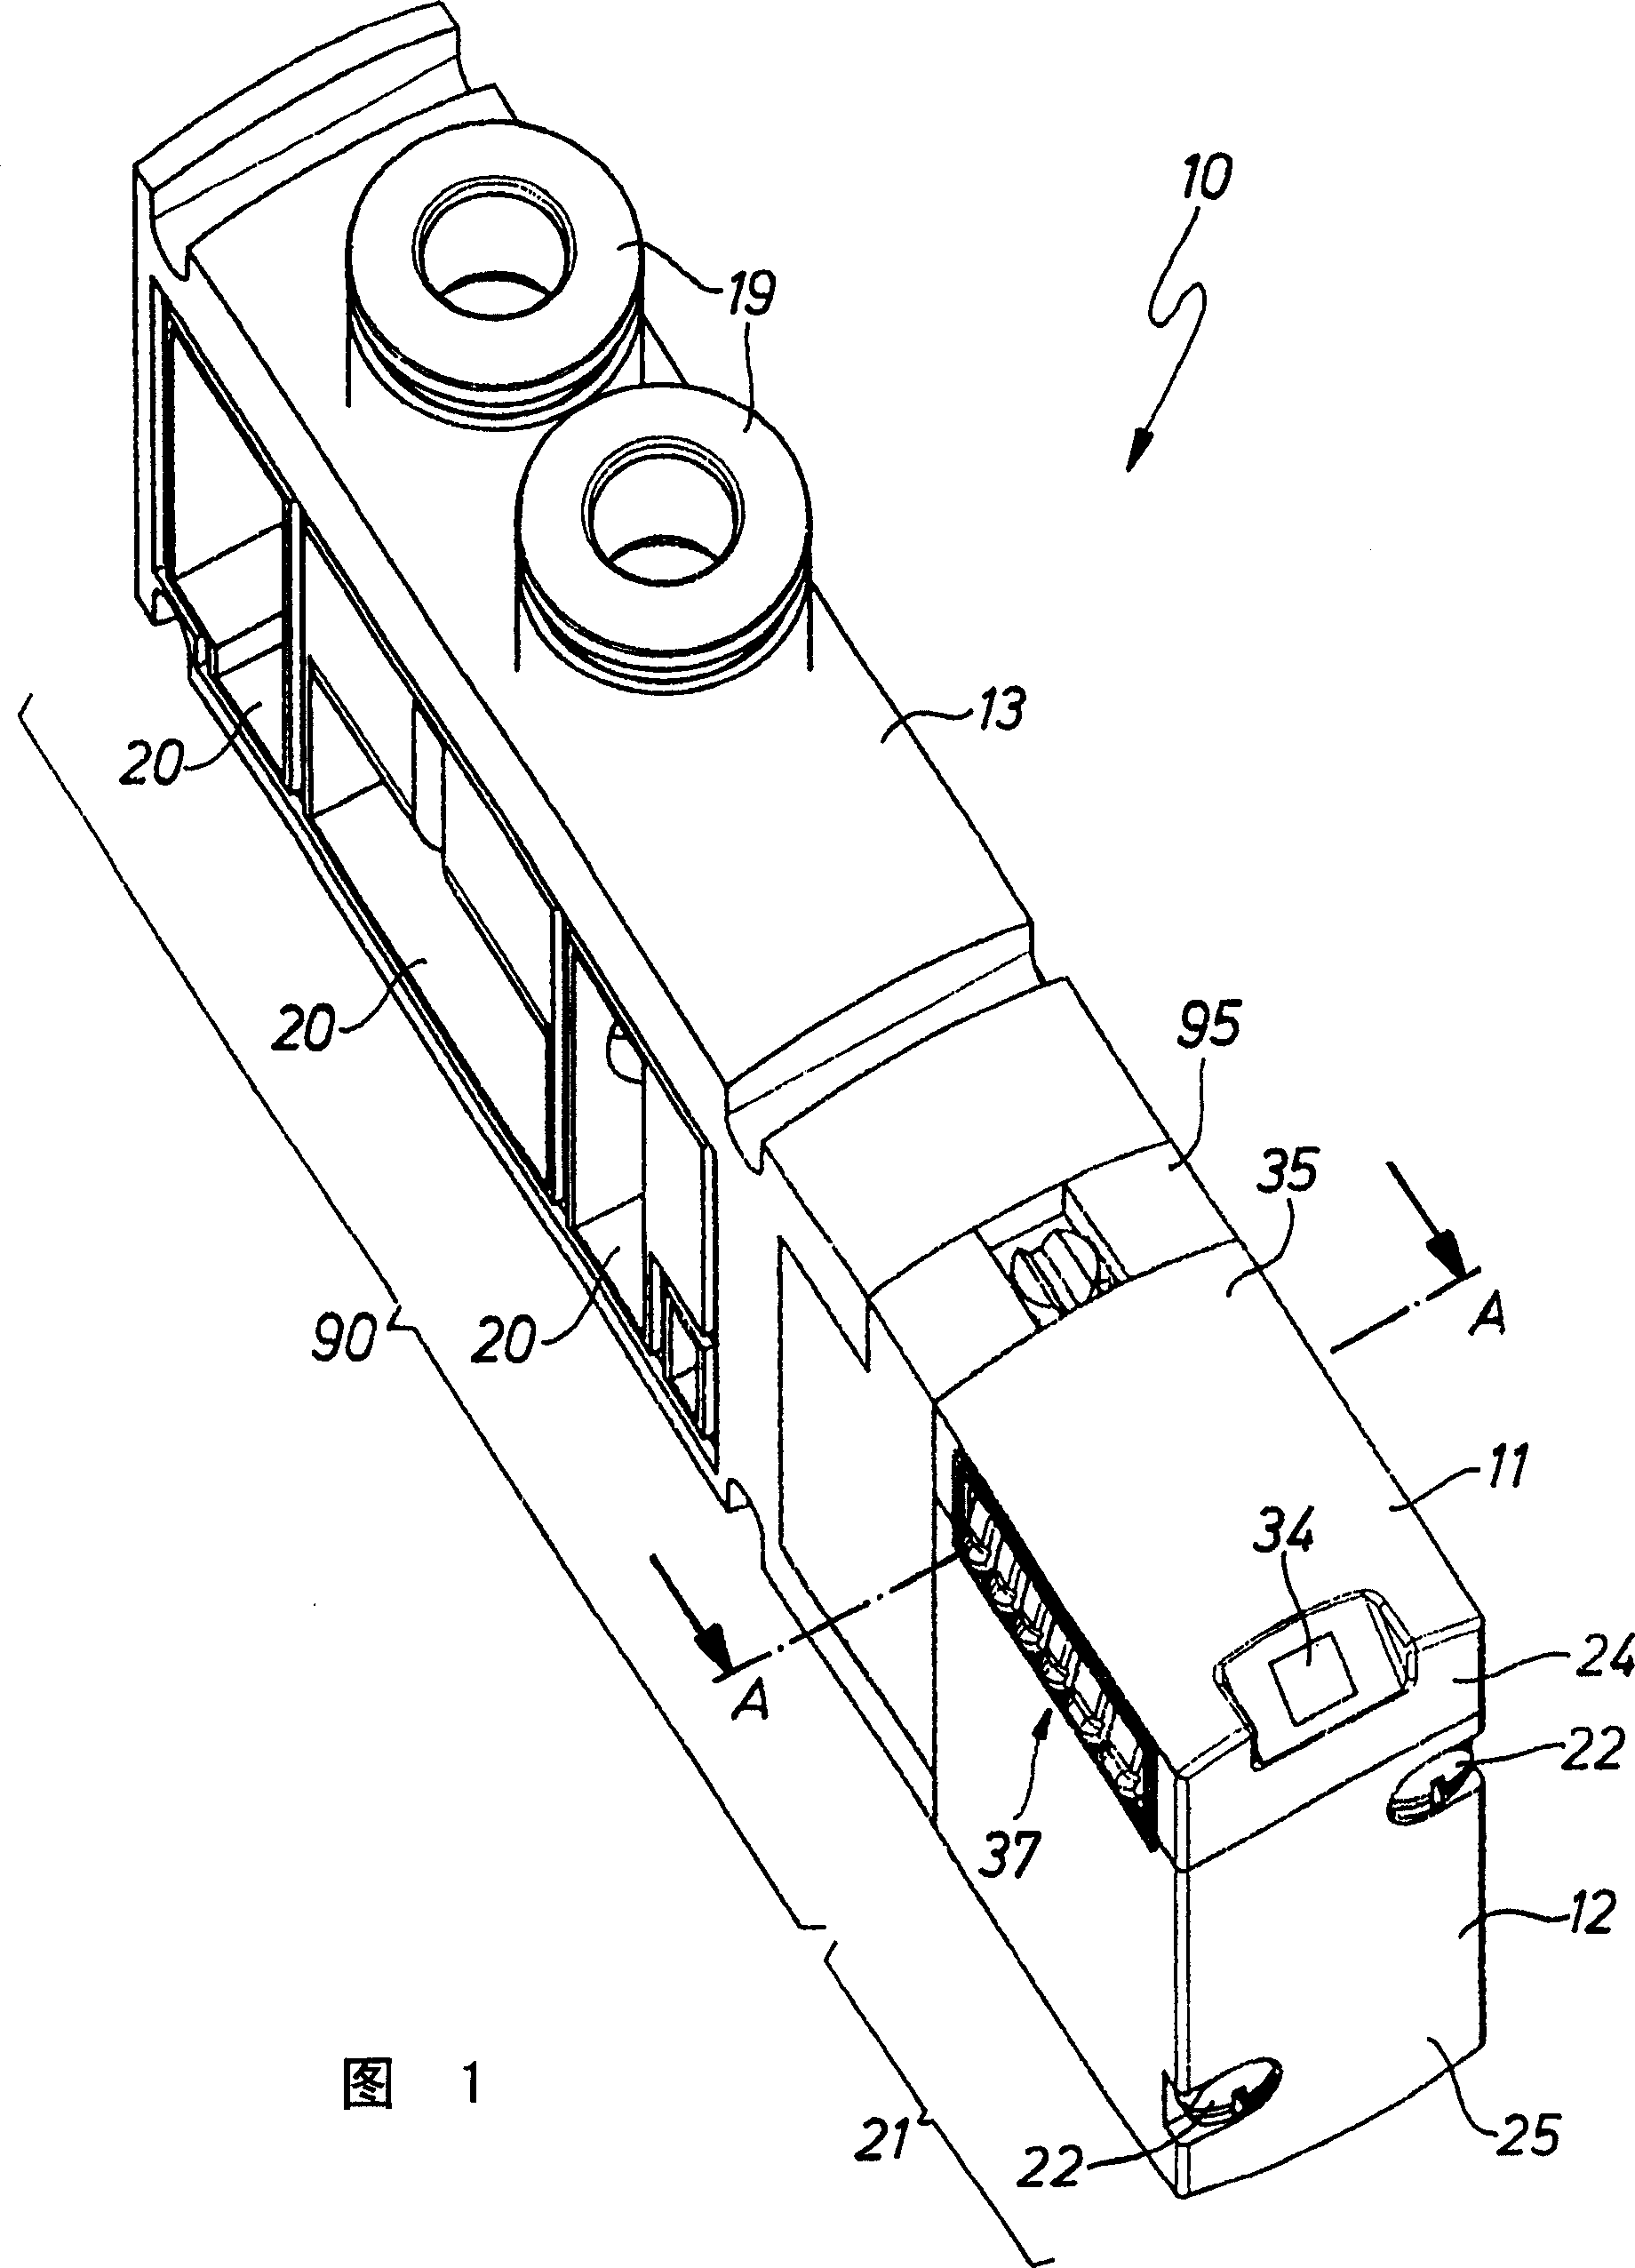 Serial modules of electric valve driver for controlling hydrodynamic valve device